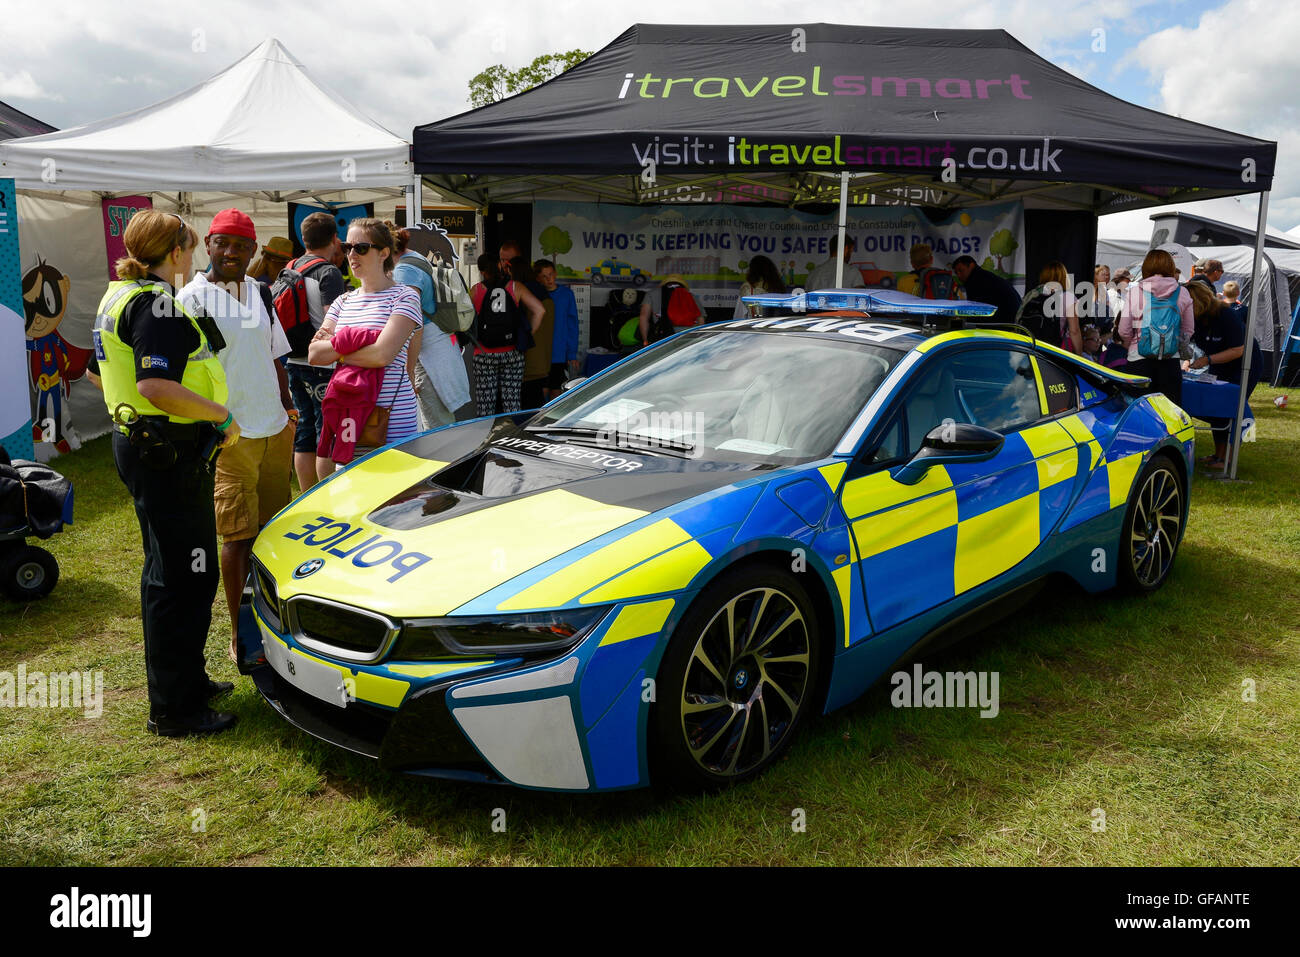 Carfest North, Bolesworth, Cheshire, UK. 30th July 2016. A BMW i8 Interceptor car on display with a Police livery. The event is the brainchild of Chris Evans and features 3 days of cars, music and entertainment with profits being donated to the charity Children in Need. Andrew Paterson/Alamy Live News Stock Photo